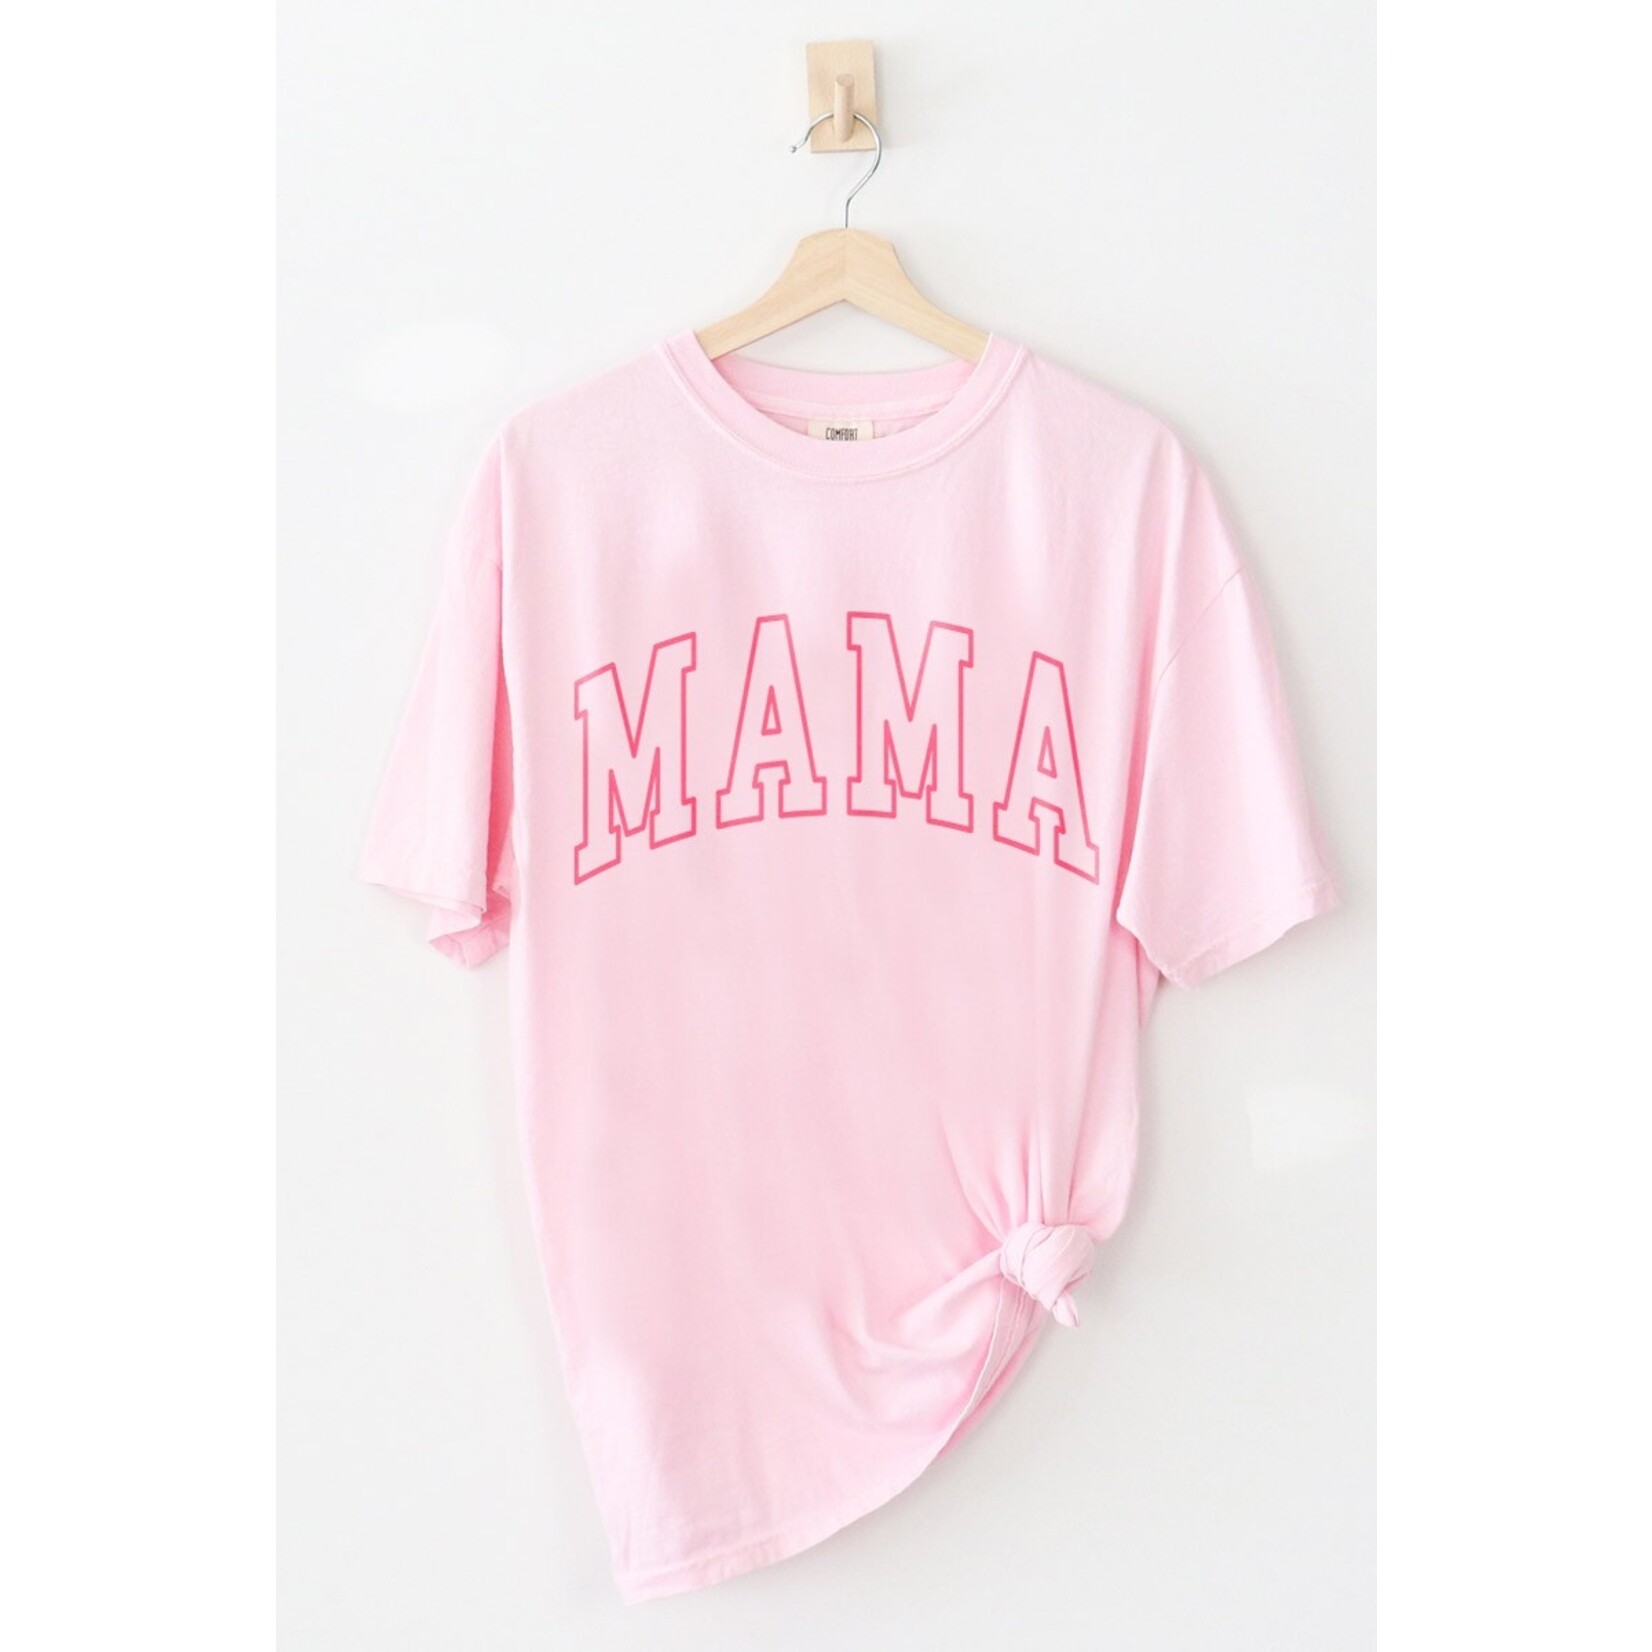 Golden Rose Clothing Mama Graphic Tee